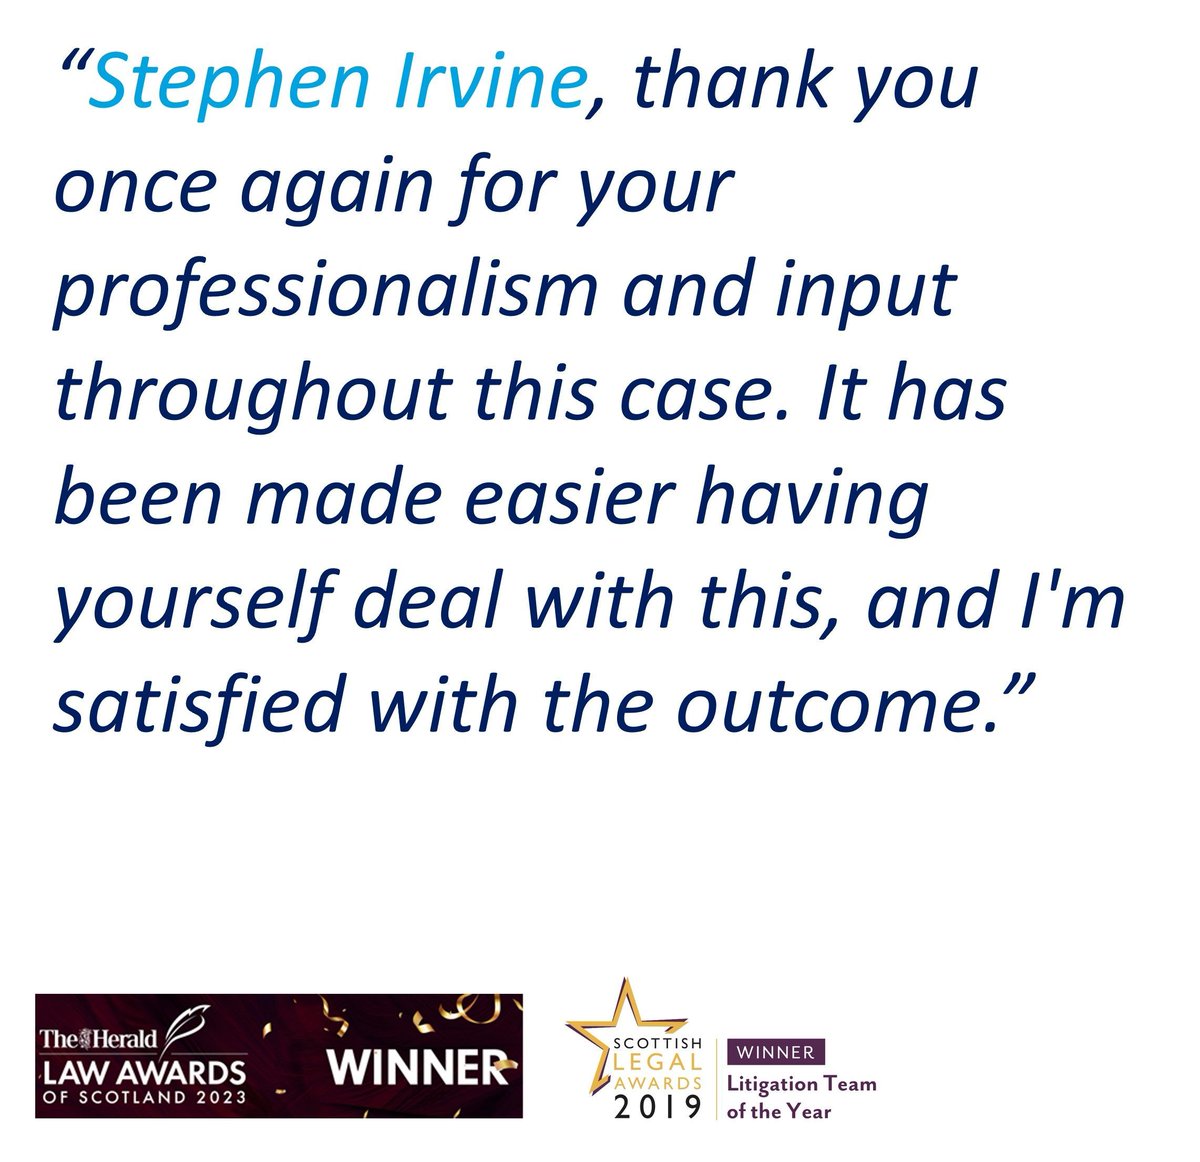 Outstanding feedback for our approachable, expert team from our clients on a consistent basis. Great service and results. Thanks Stephen! buff.ly/3dw7YO8 

#clientfeedback #clientservice #clientexperience #clientsatisfaction